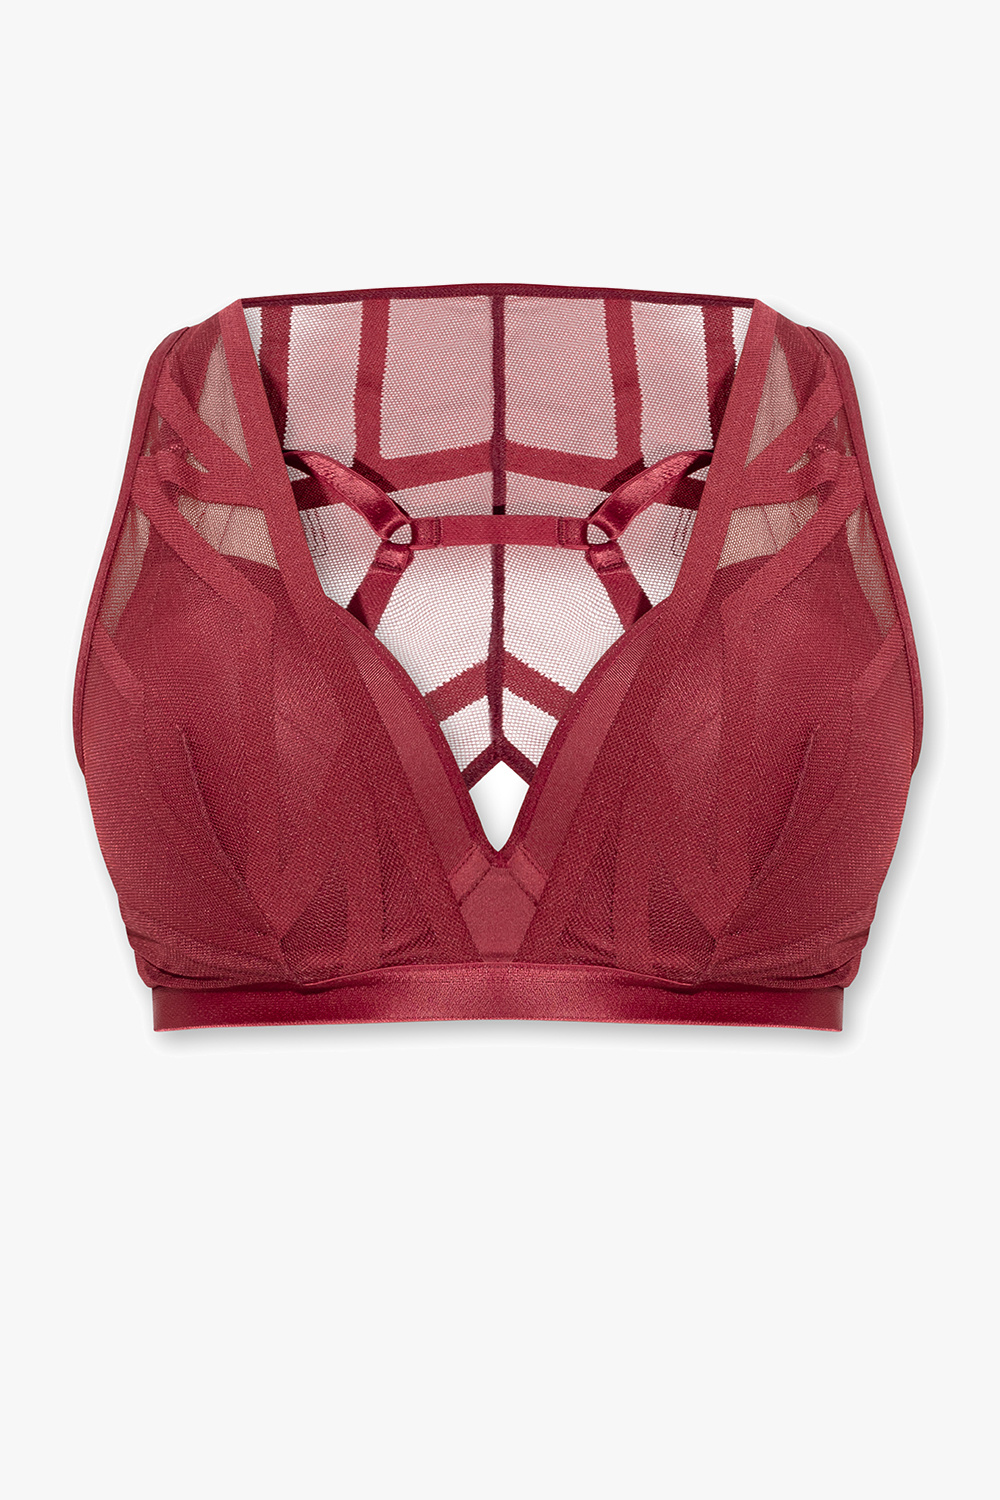 The Illusionist cabernet red lingerie